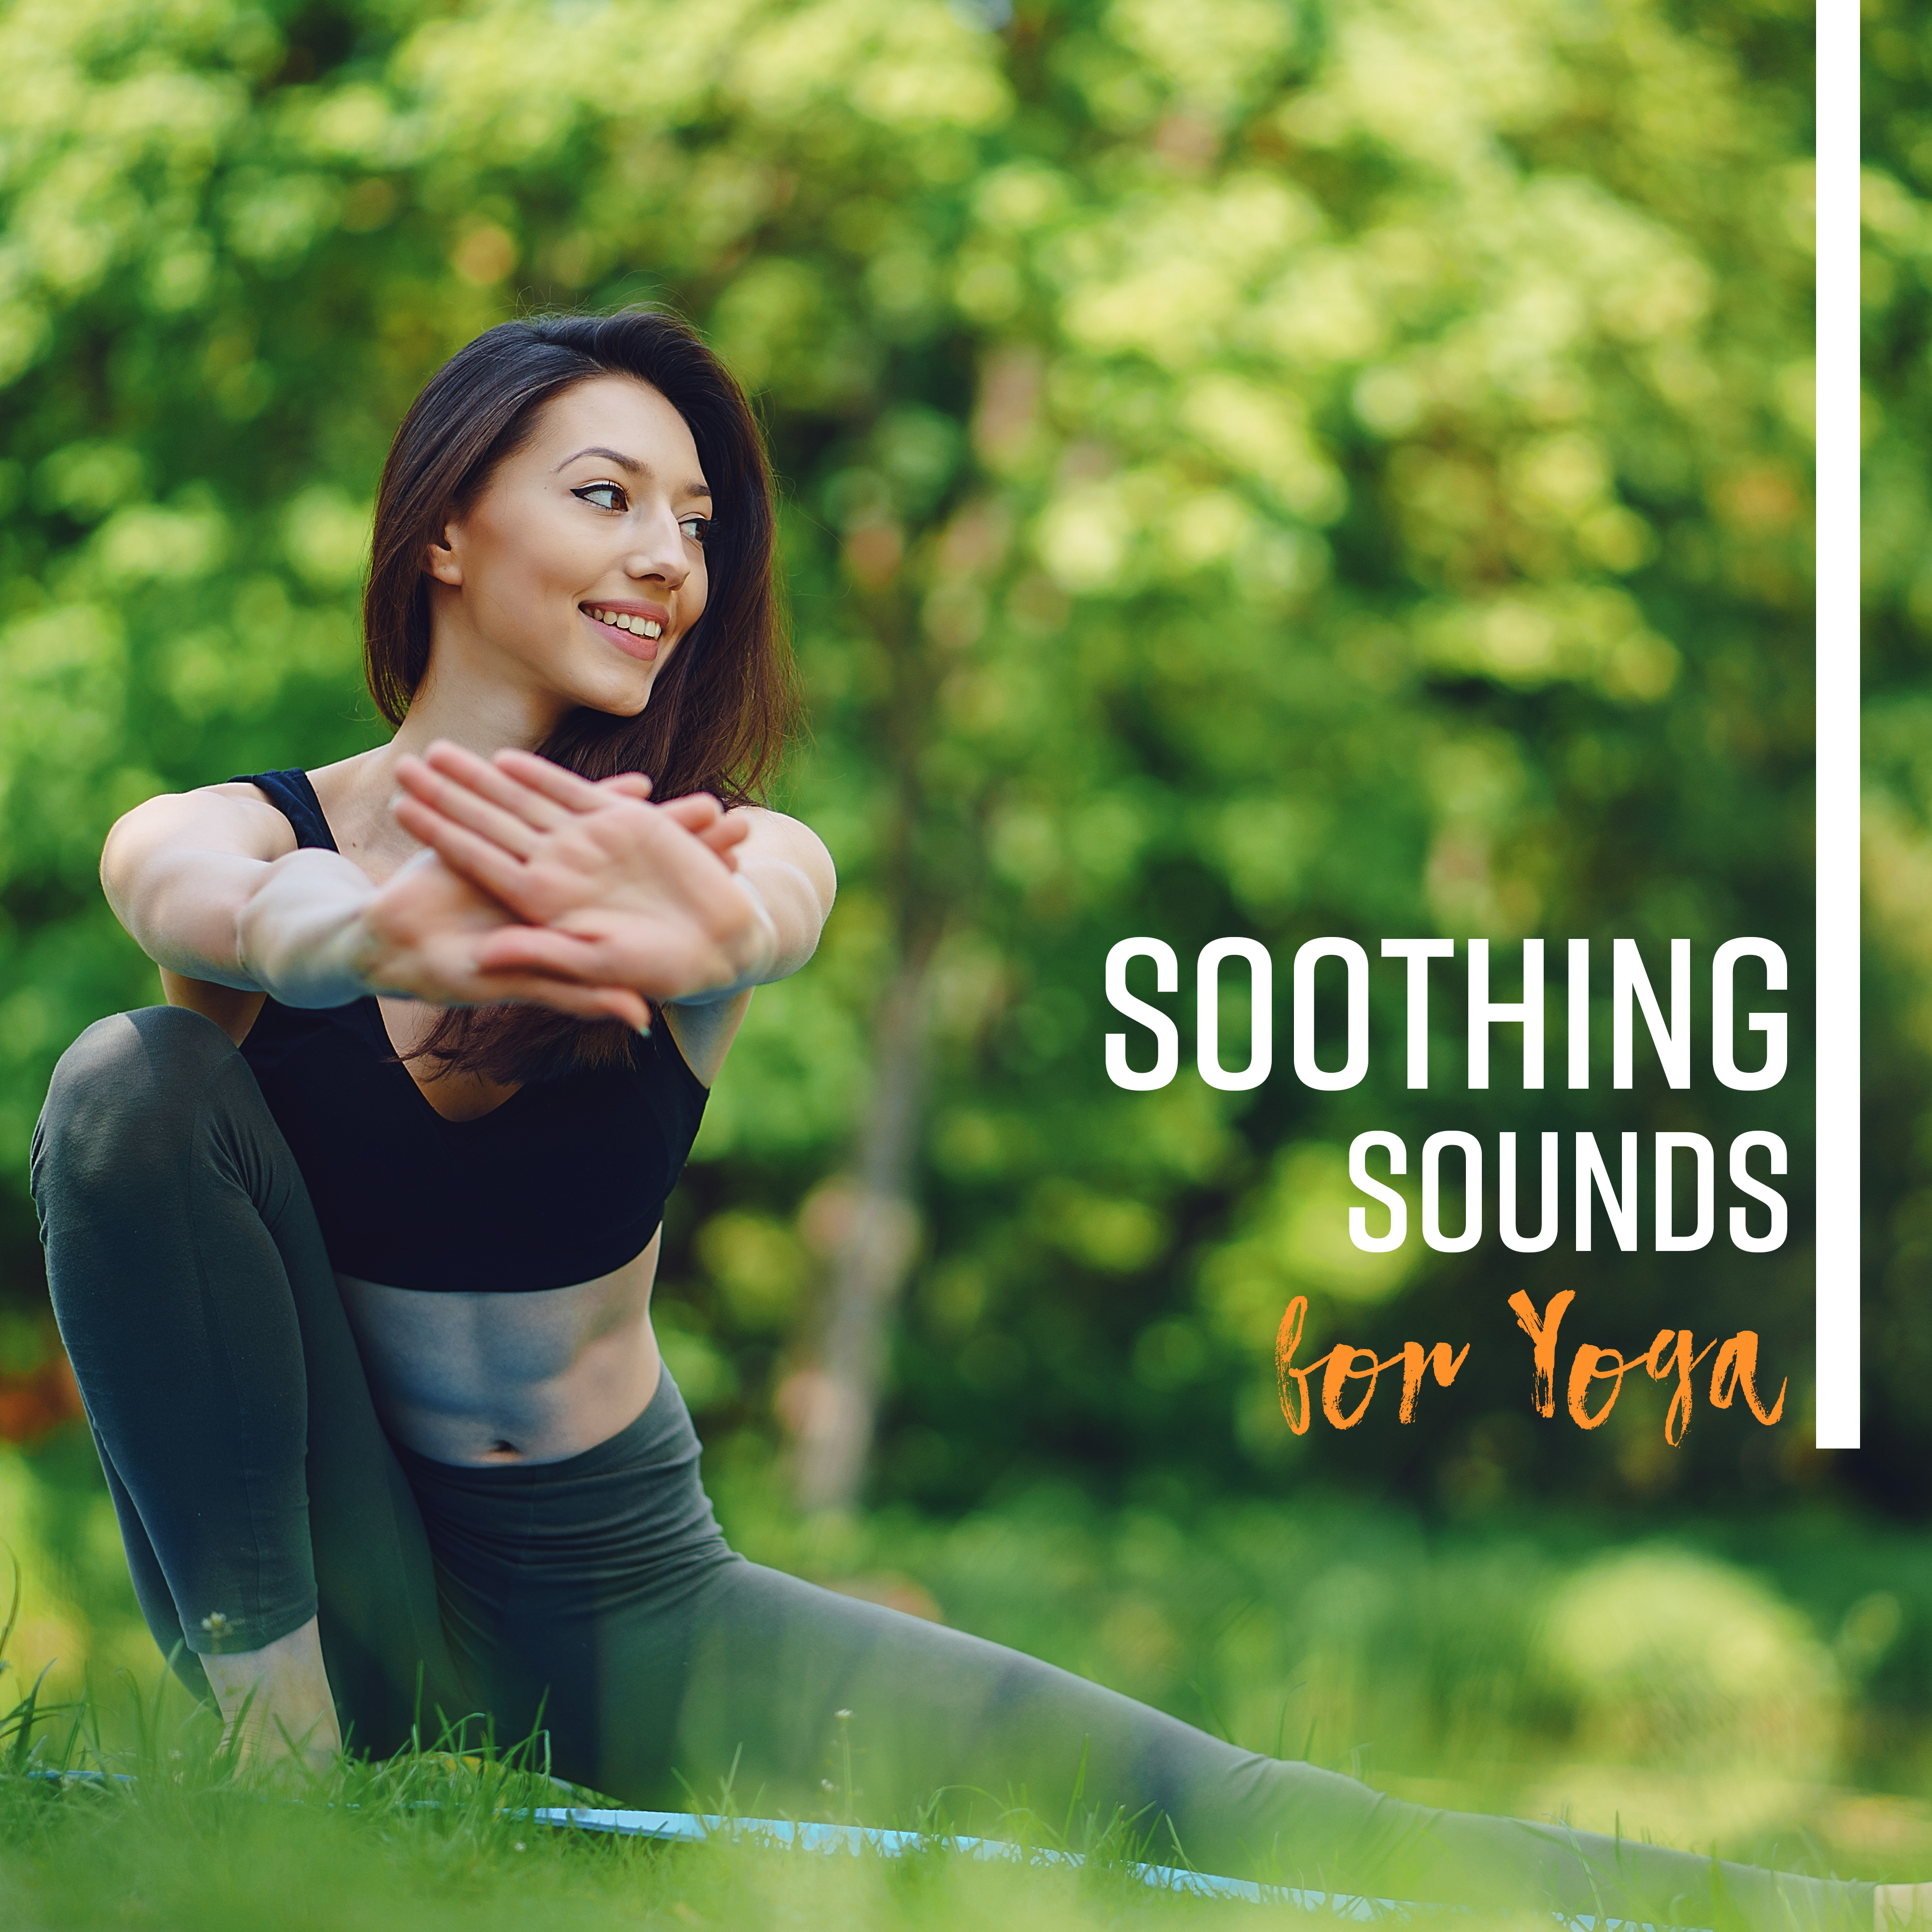 Soothing Sounds for Yoga